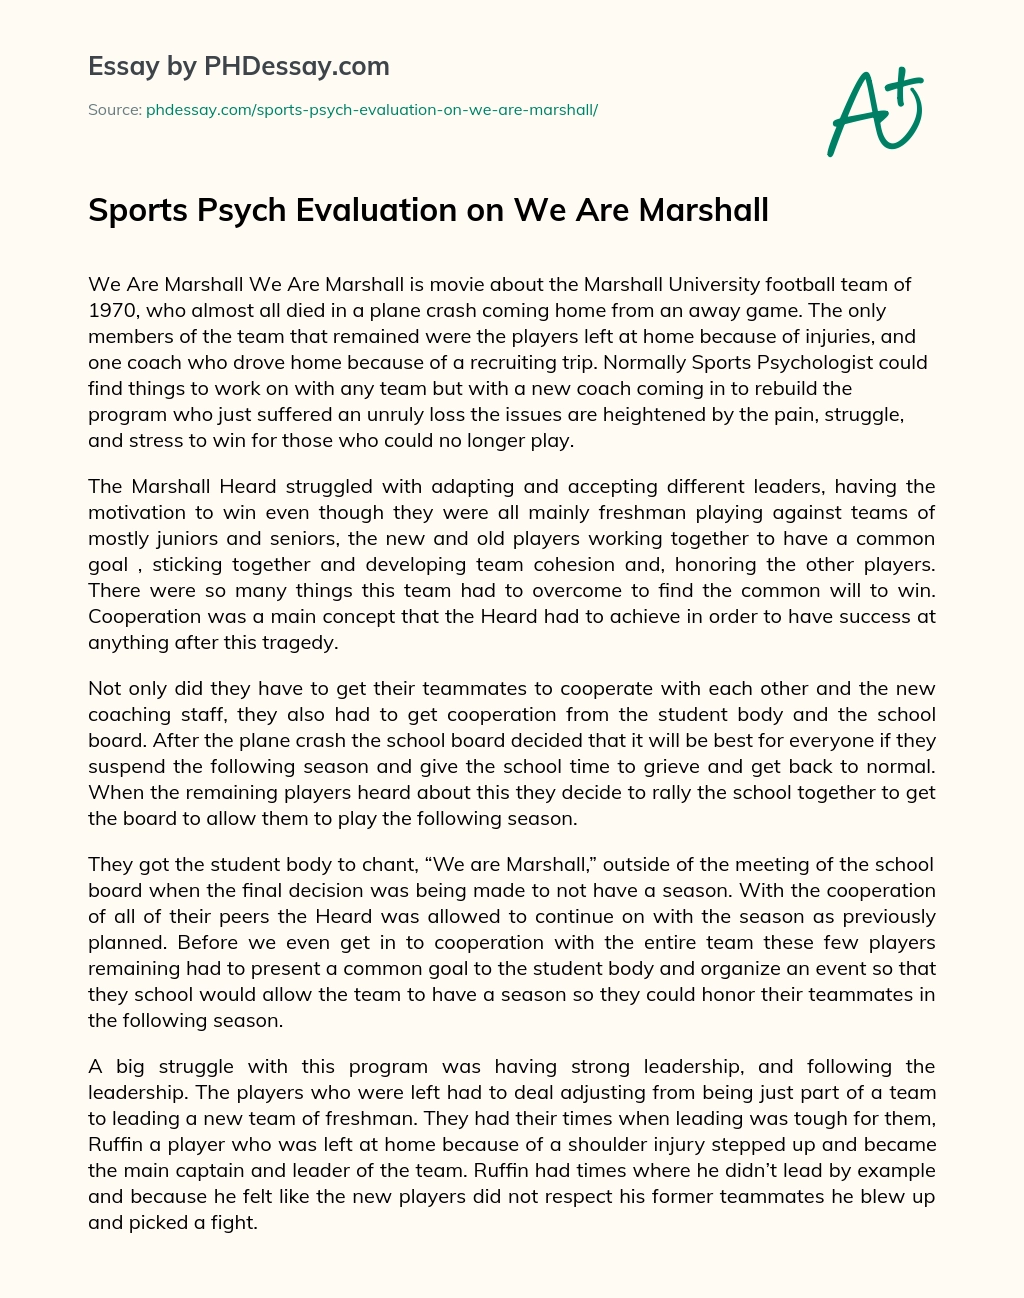 Sports Psych Evaluation on We Are Marshall essay